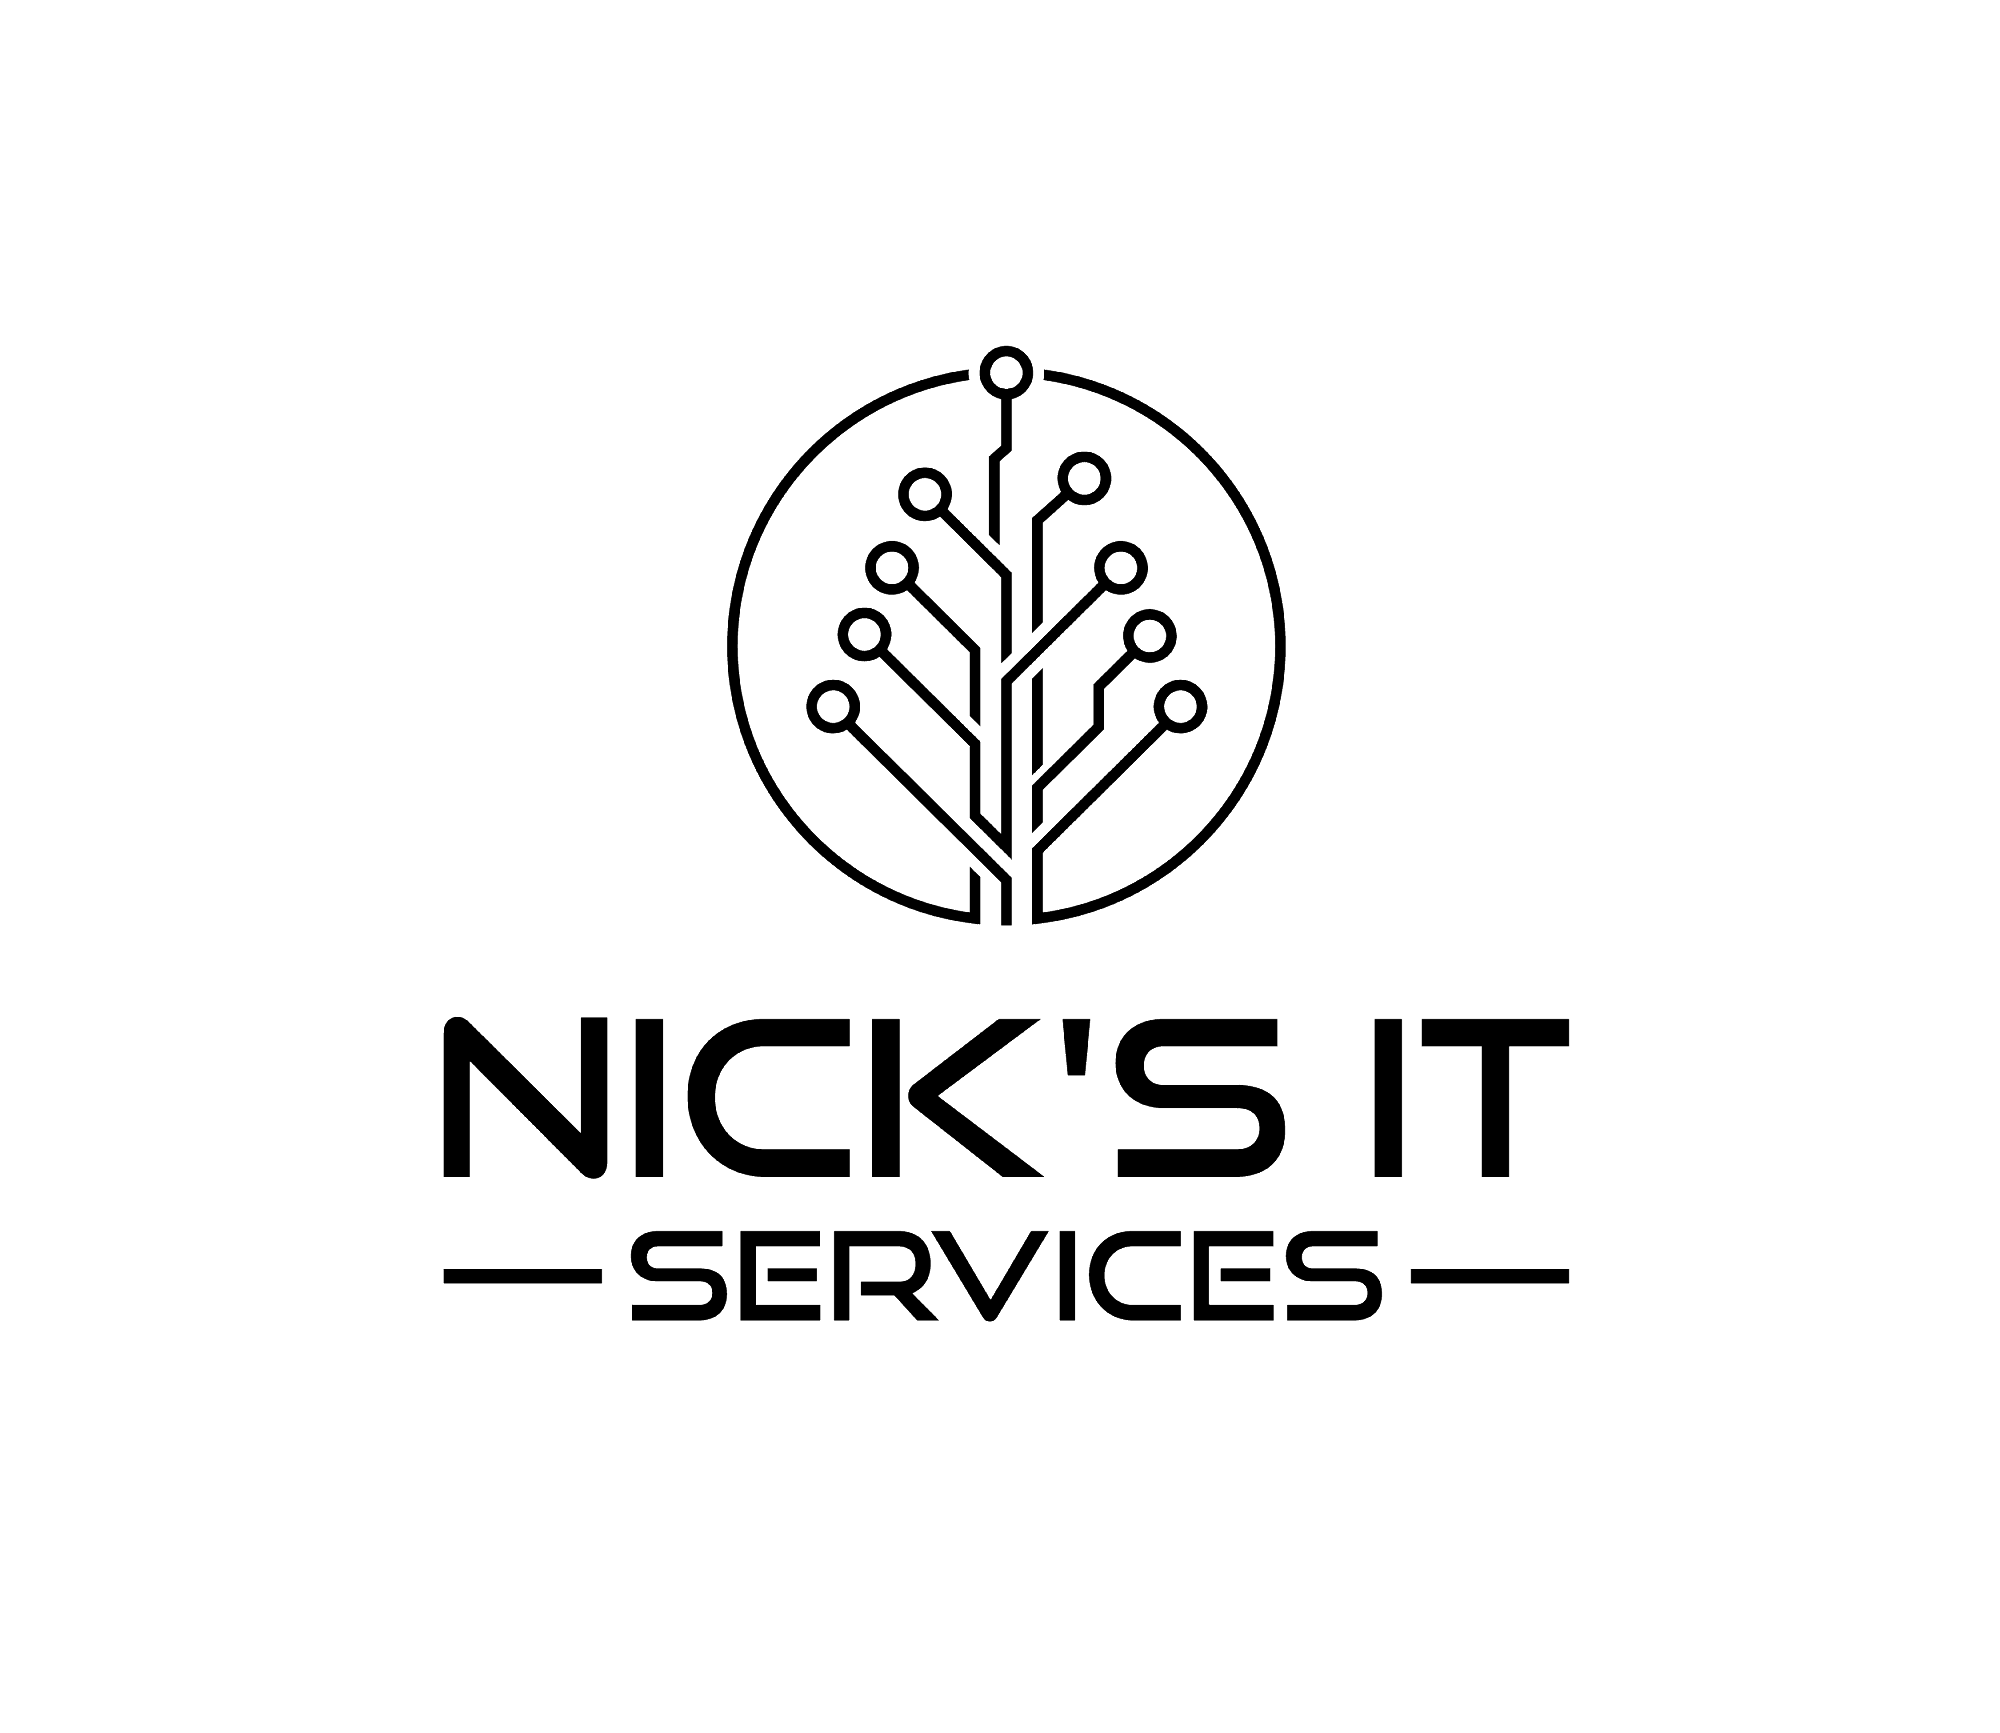 Nick's IT Services LLC 632 14th Ave TRLR 43, Havre Montana 59501